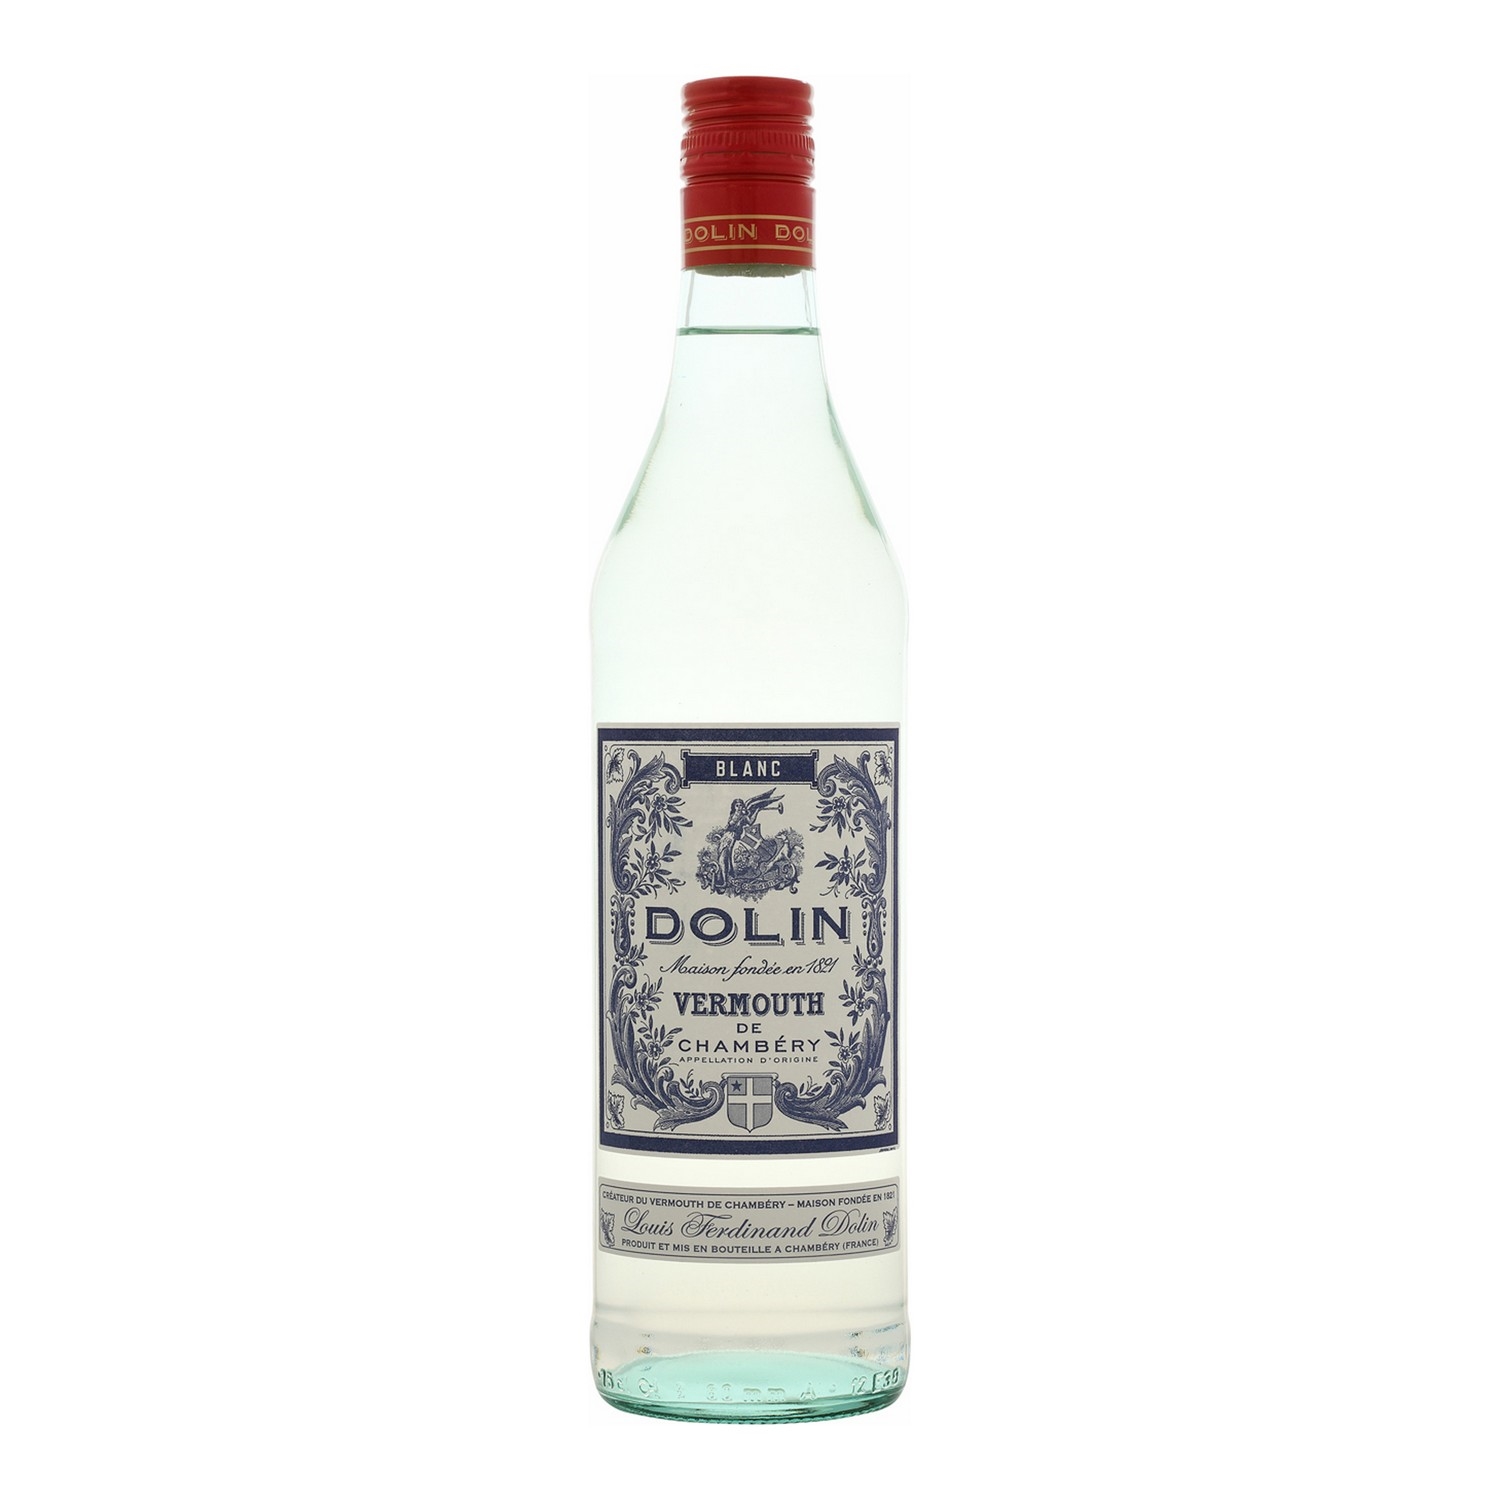 Dolin vermouth de chambery blanc  15%  75cl